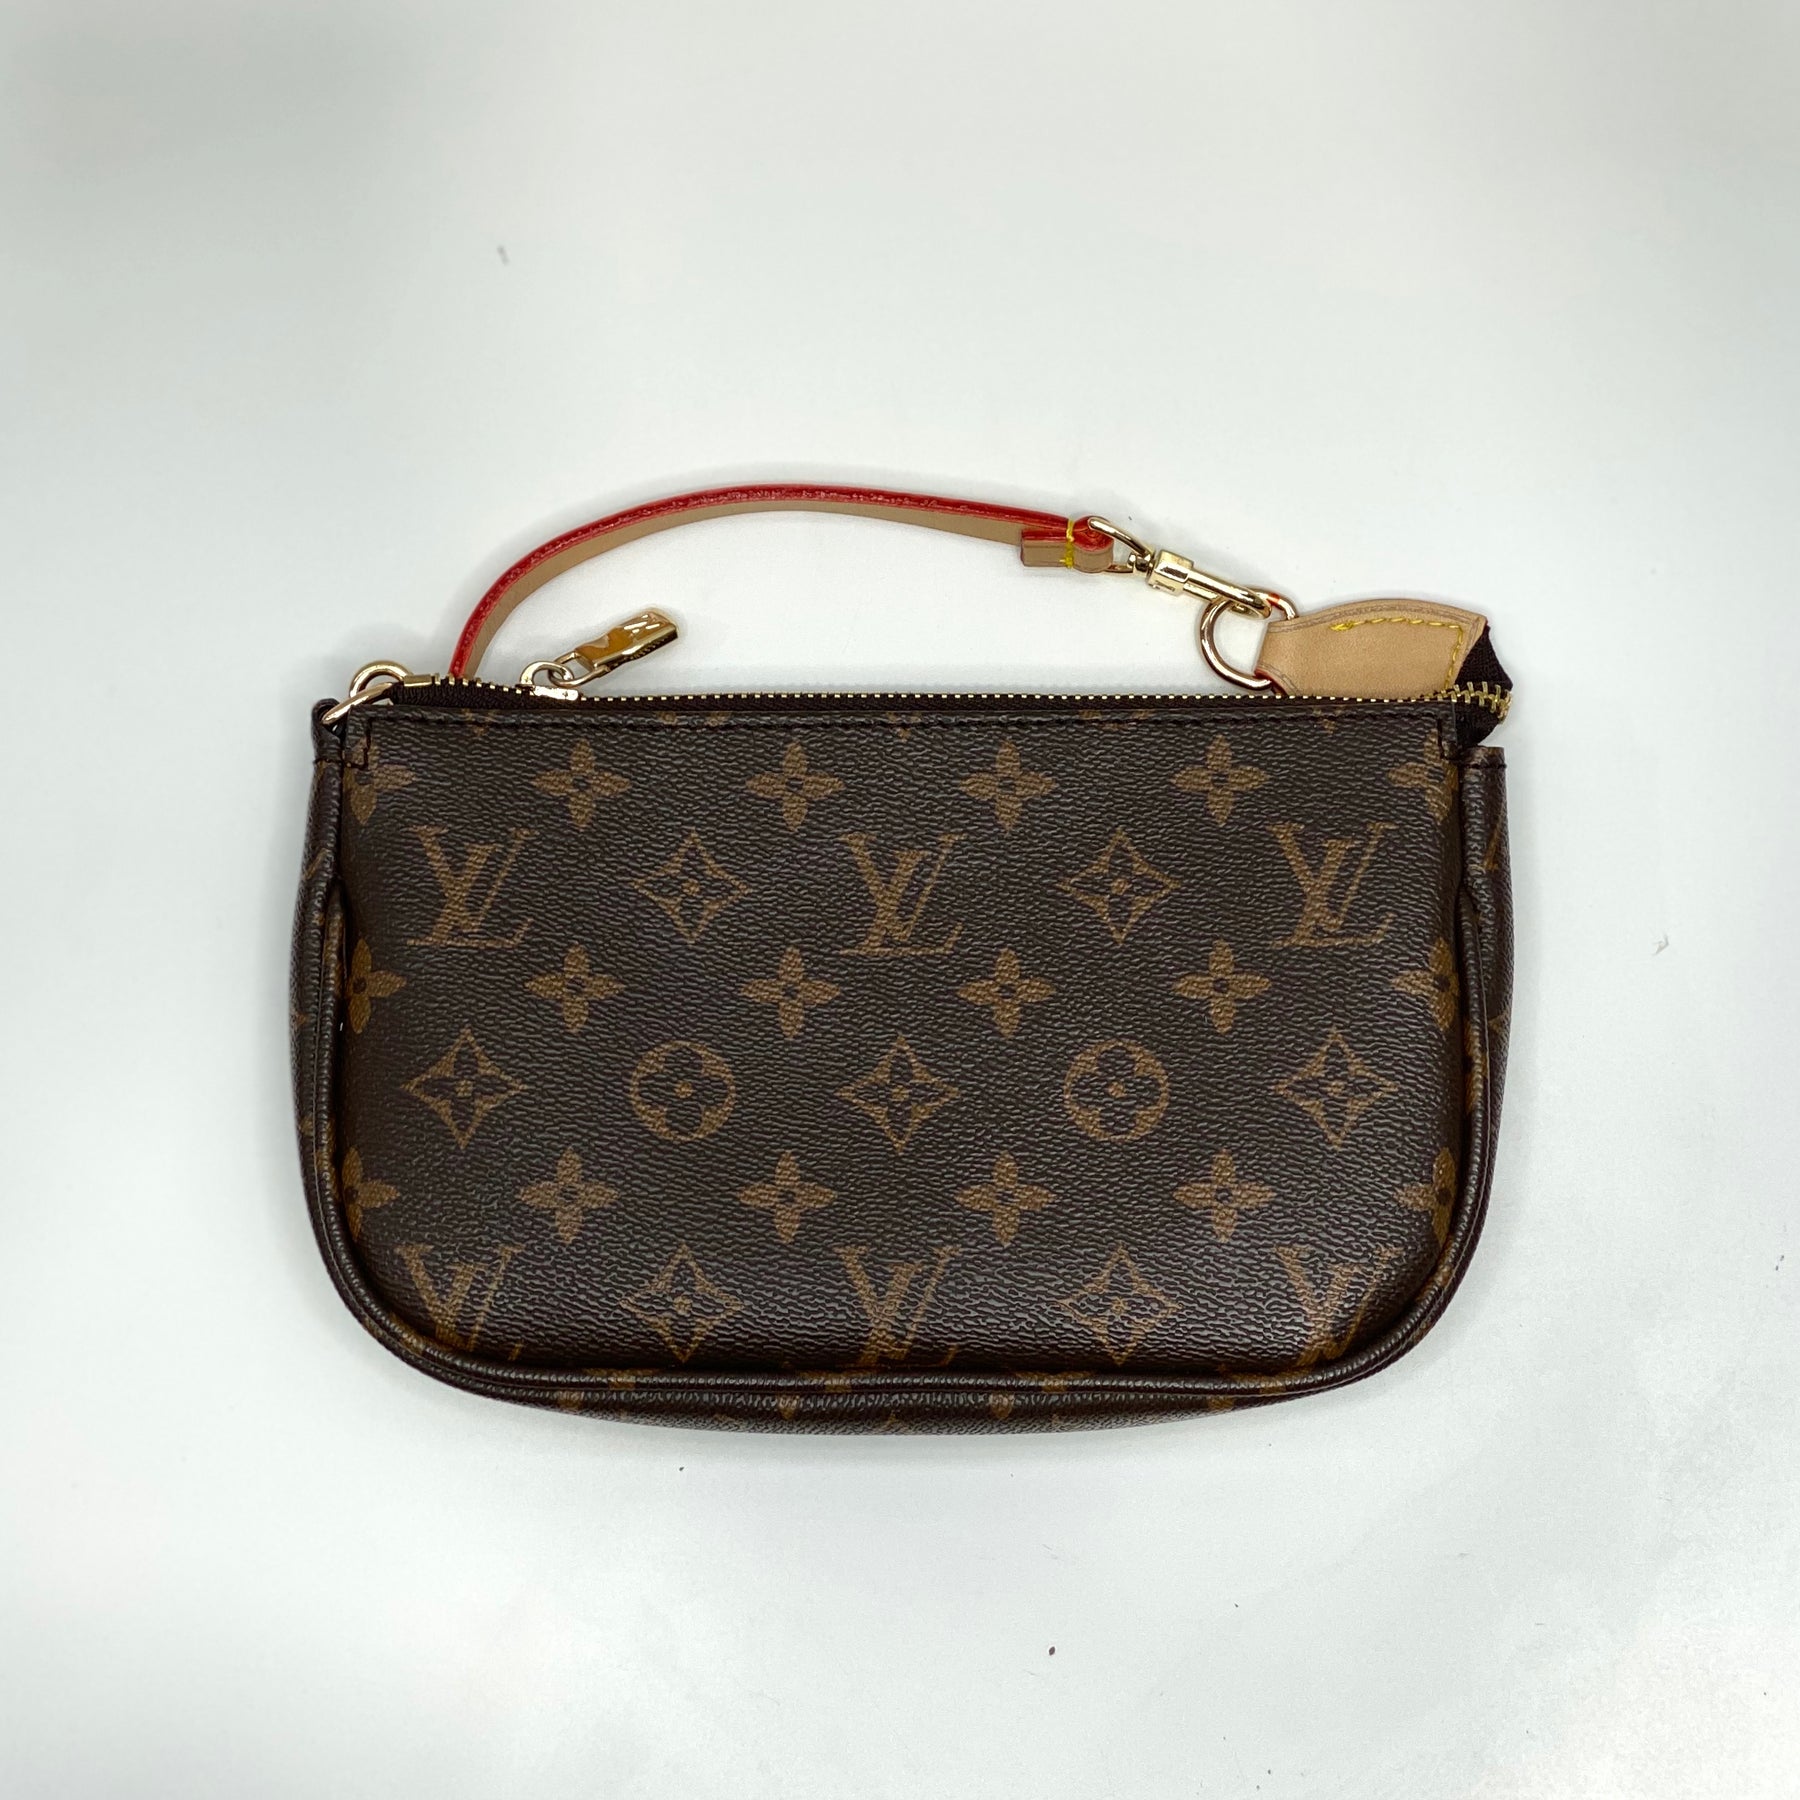 lv bag afterpay